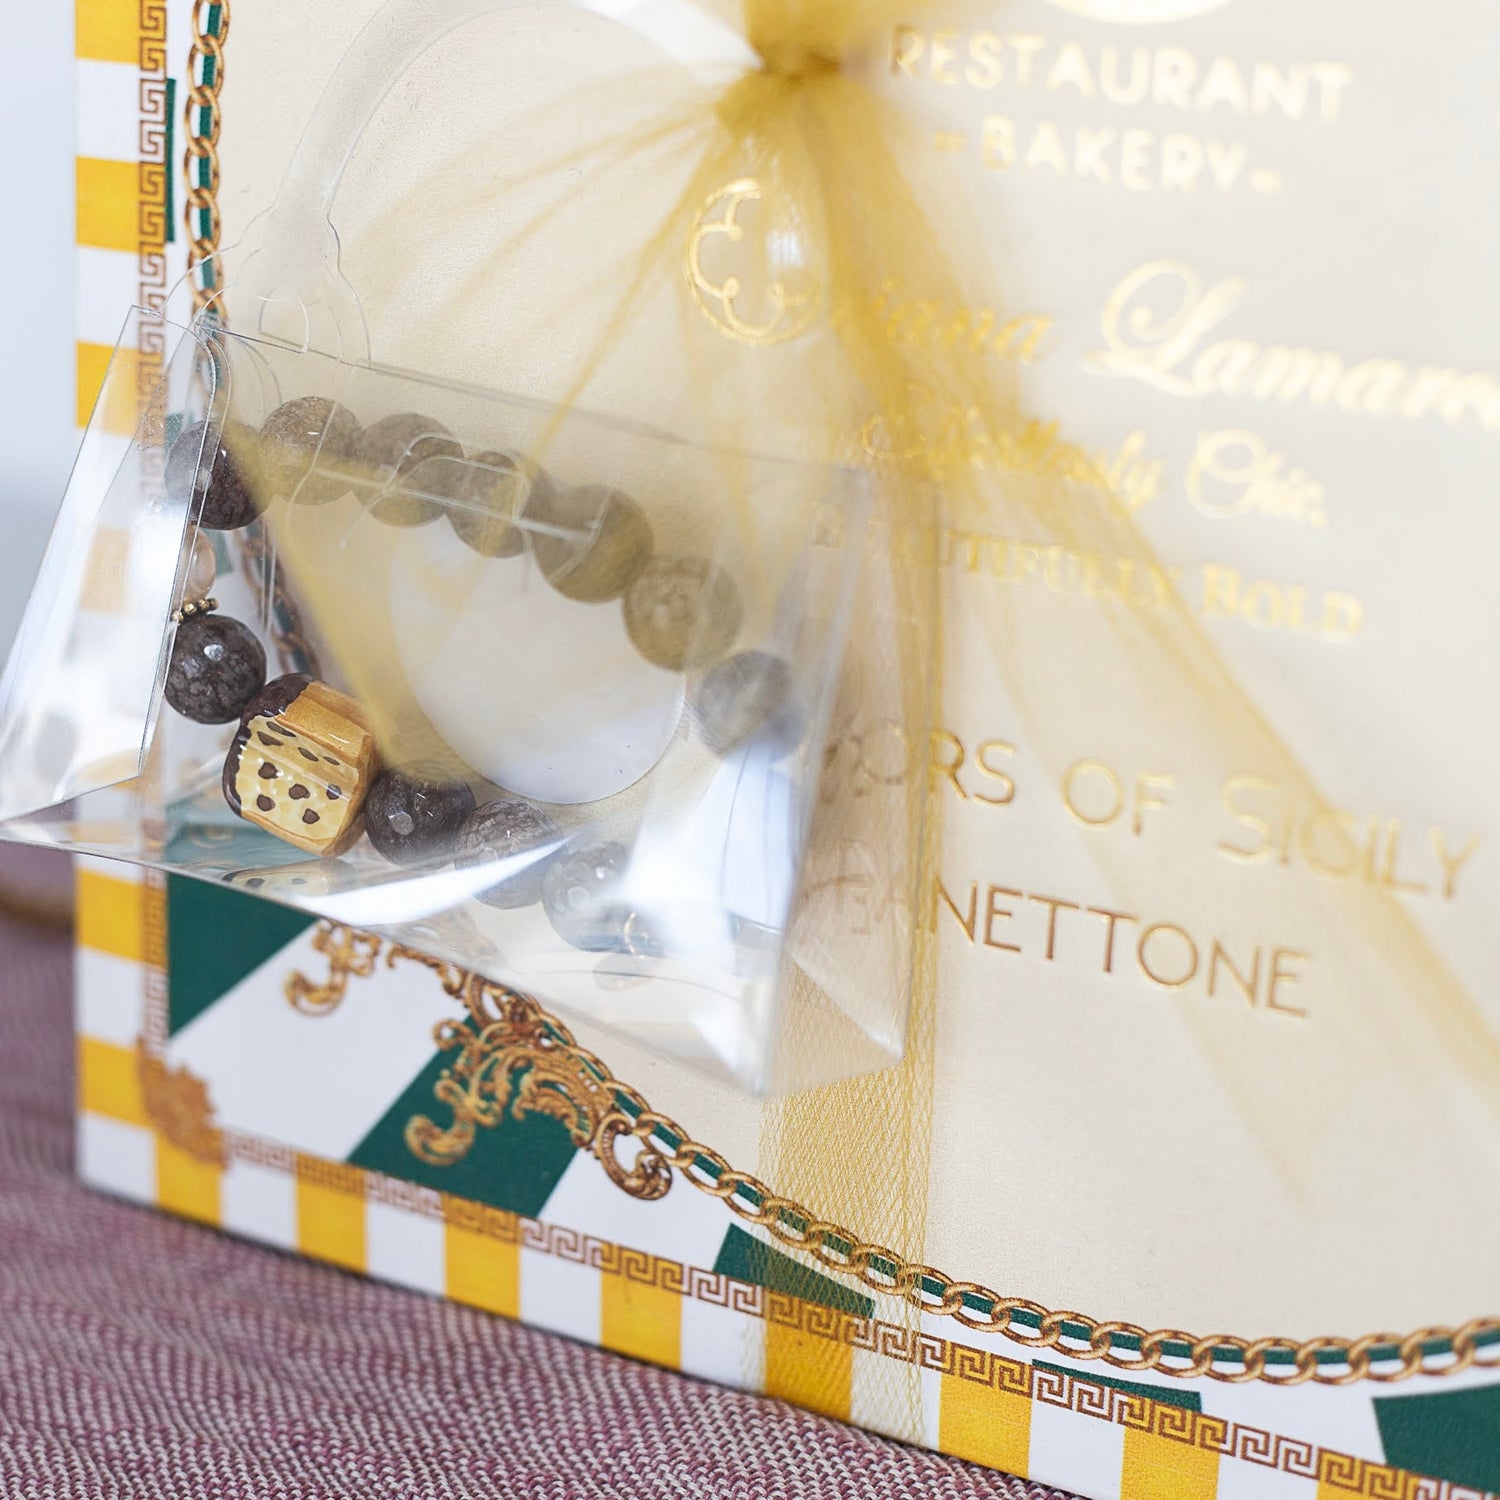 “Flavors of Sicily” Panettone by Settepani Bakery